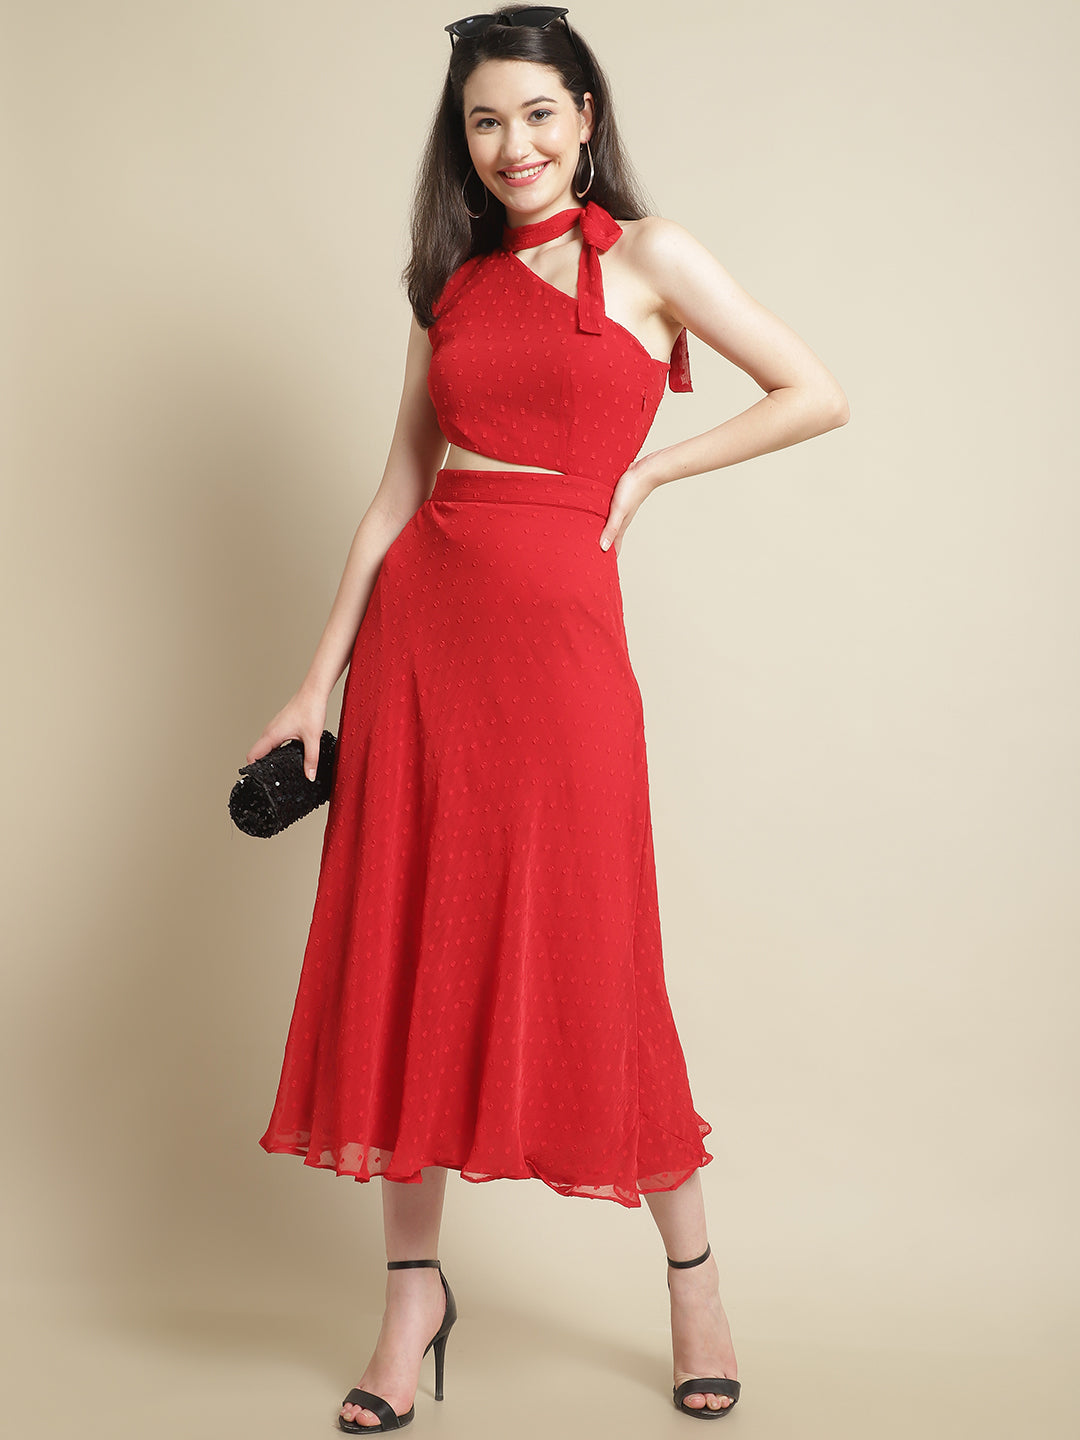 Red Side Cut-Out Dress With Neck Tie Band